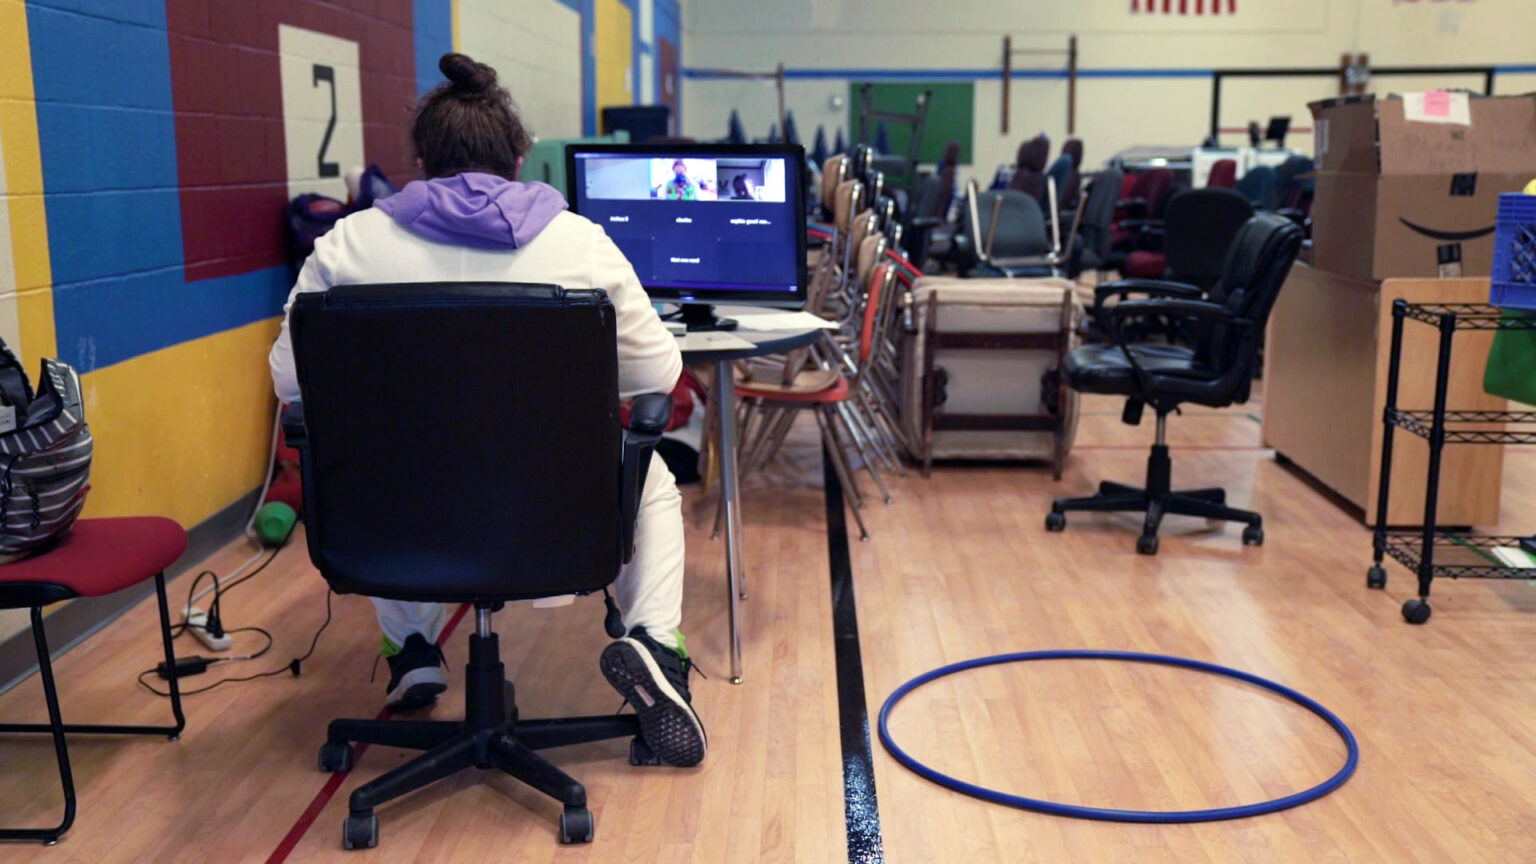 A teachers sits in an officer chair facing a screen for a virtual classroom in a gym filled with stacked chairs and other items.